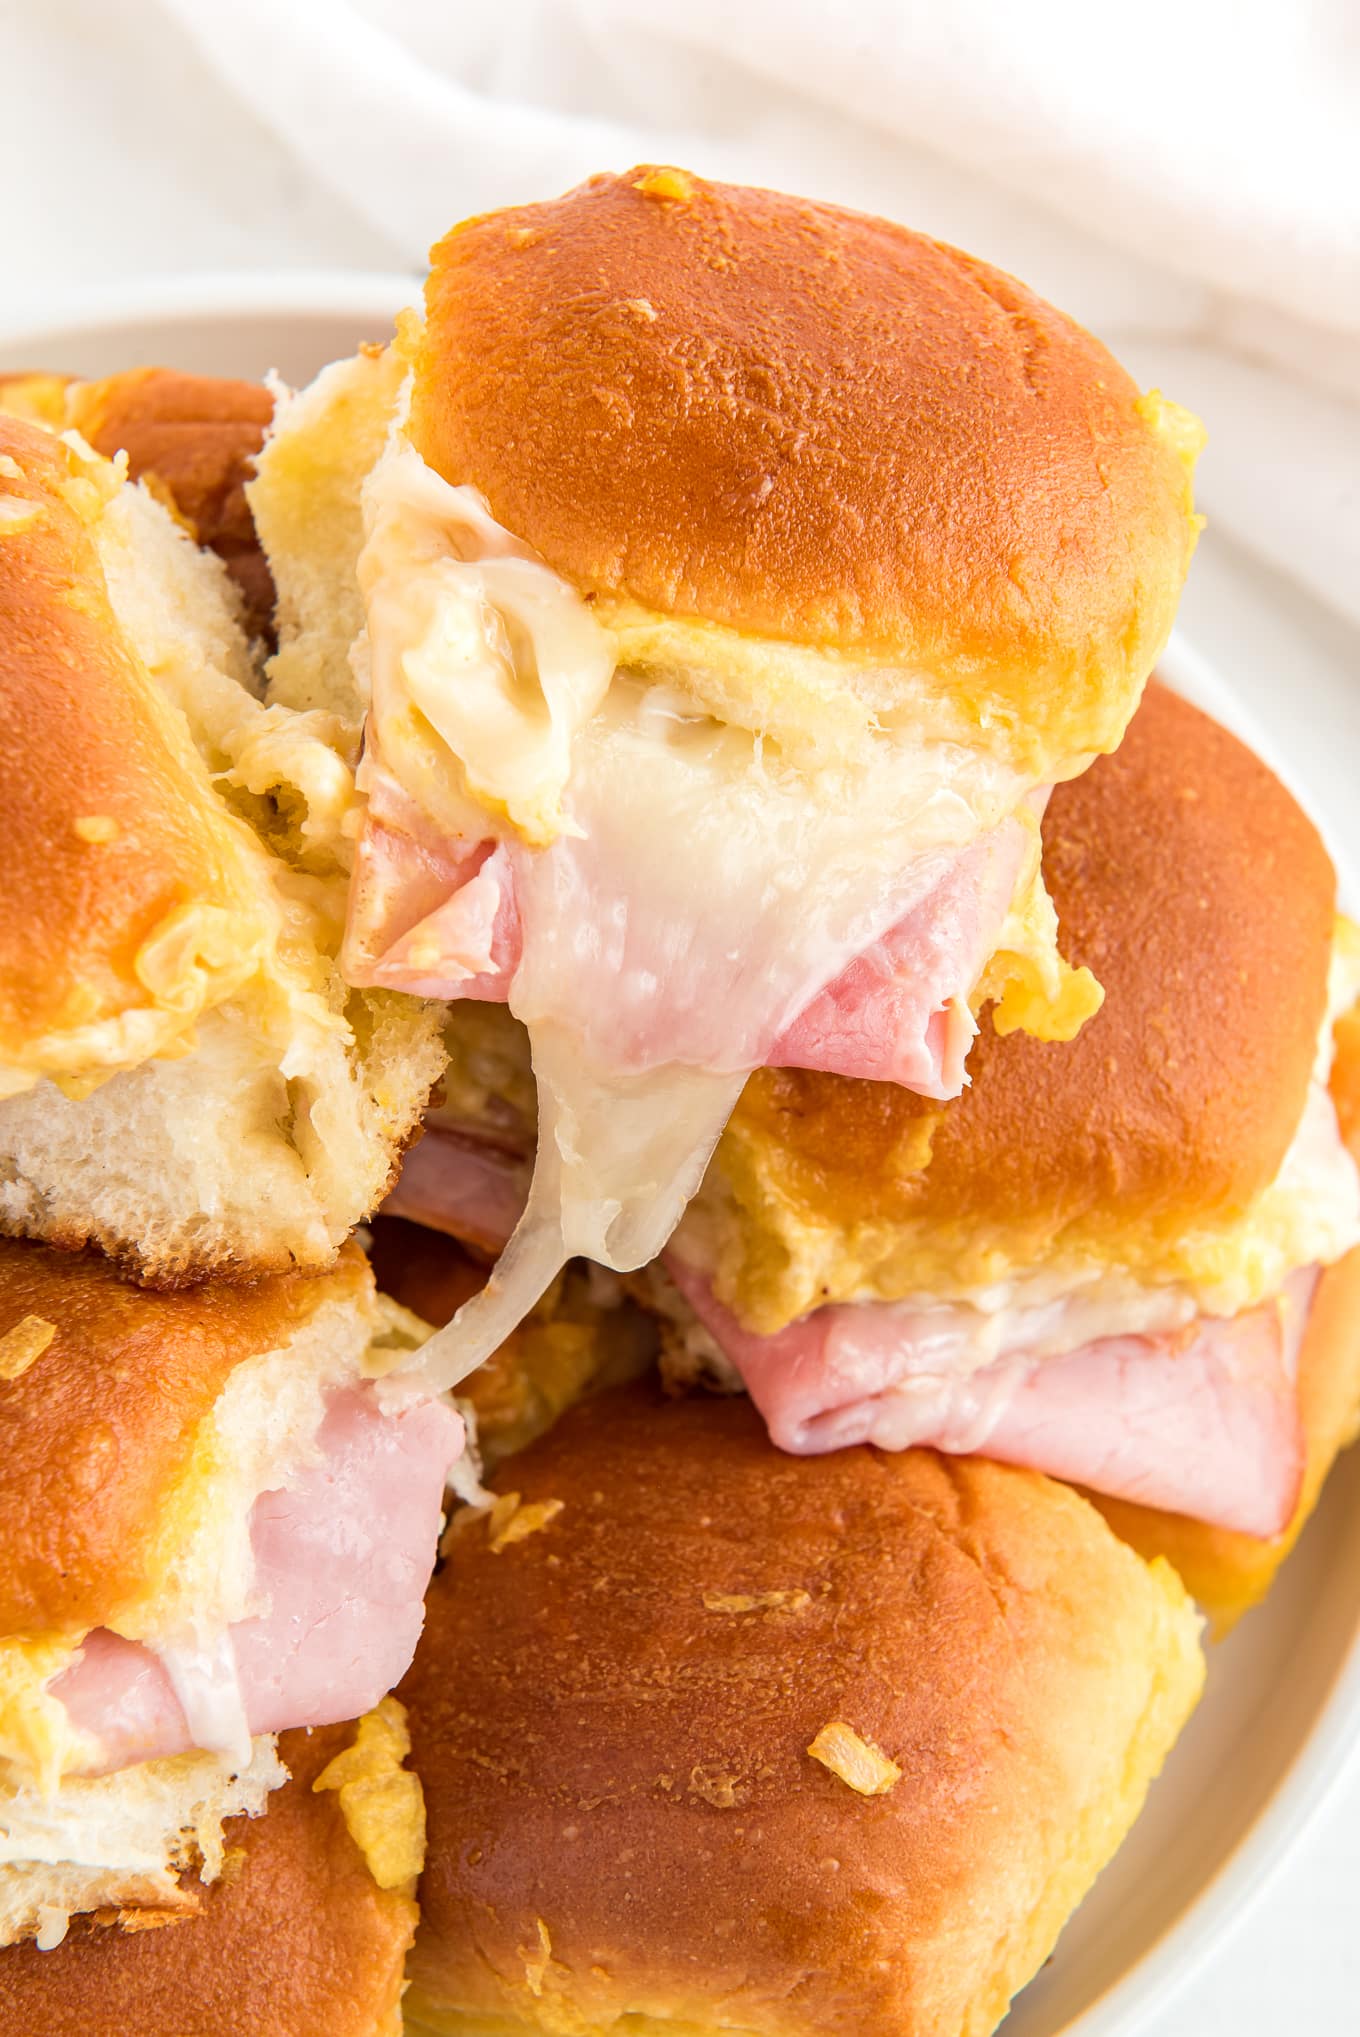 Hawaiian Rolls Sliders with ham and Swiss cheese stacked on a plate./ Delicious ham and cheese sliders on soft and sweet Hawaiian rolls, stacked with melted cheese, juicy ham, and topped with a golden-brown glaze, perfect for a quick dinner or appetizer. 